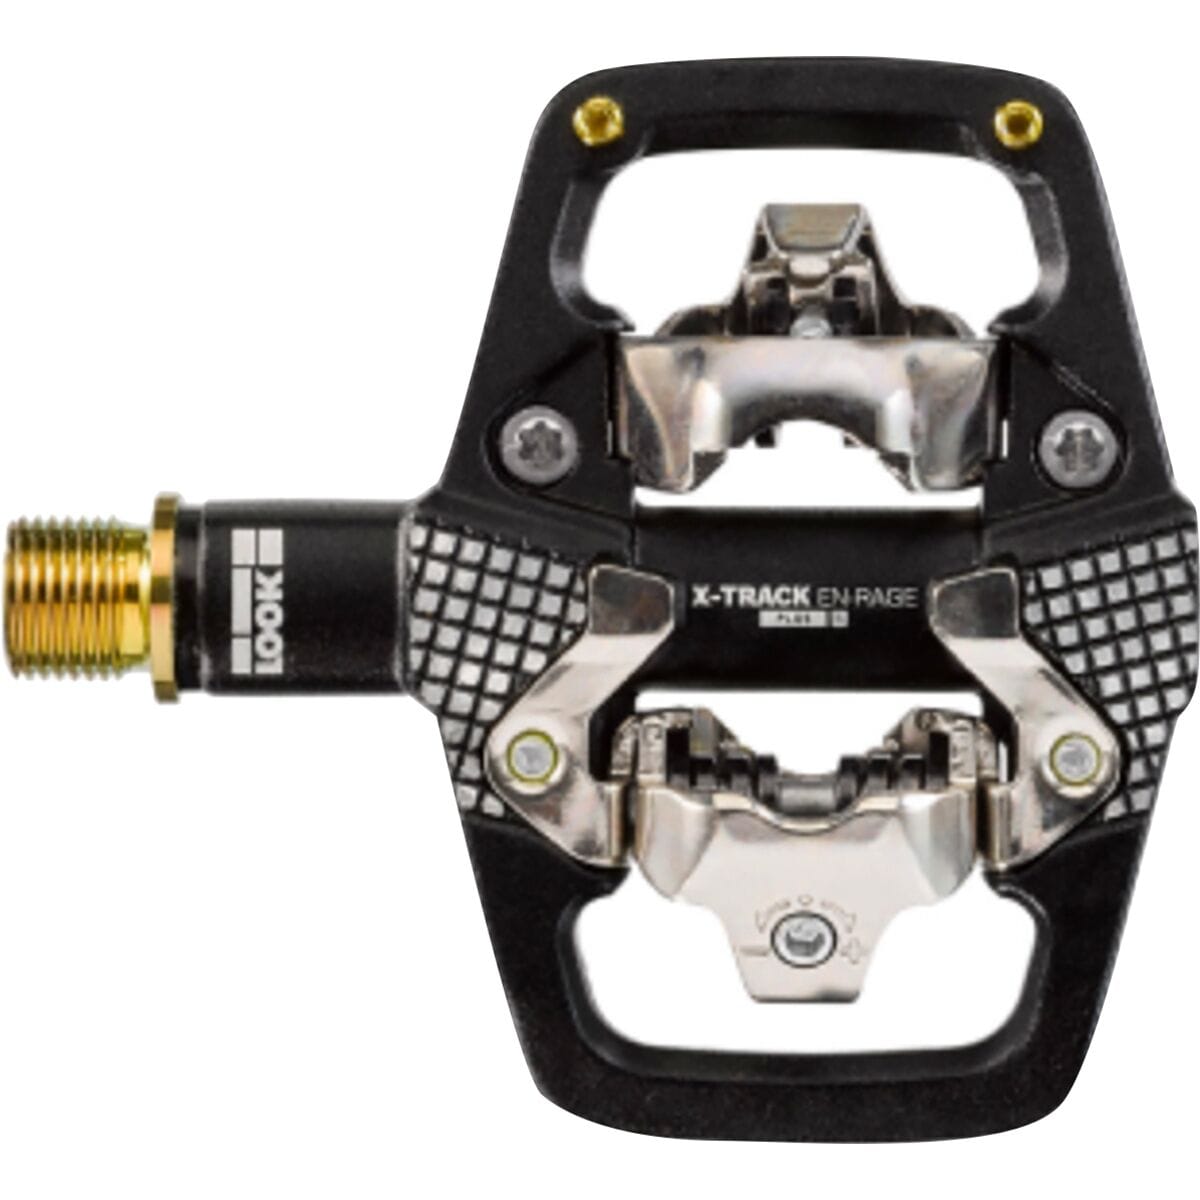 Look Cycle X-Track En-Rage + Ti Pedals Ti, Pair